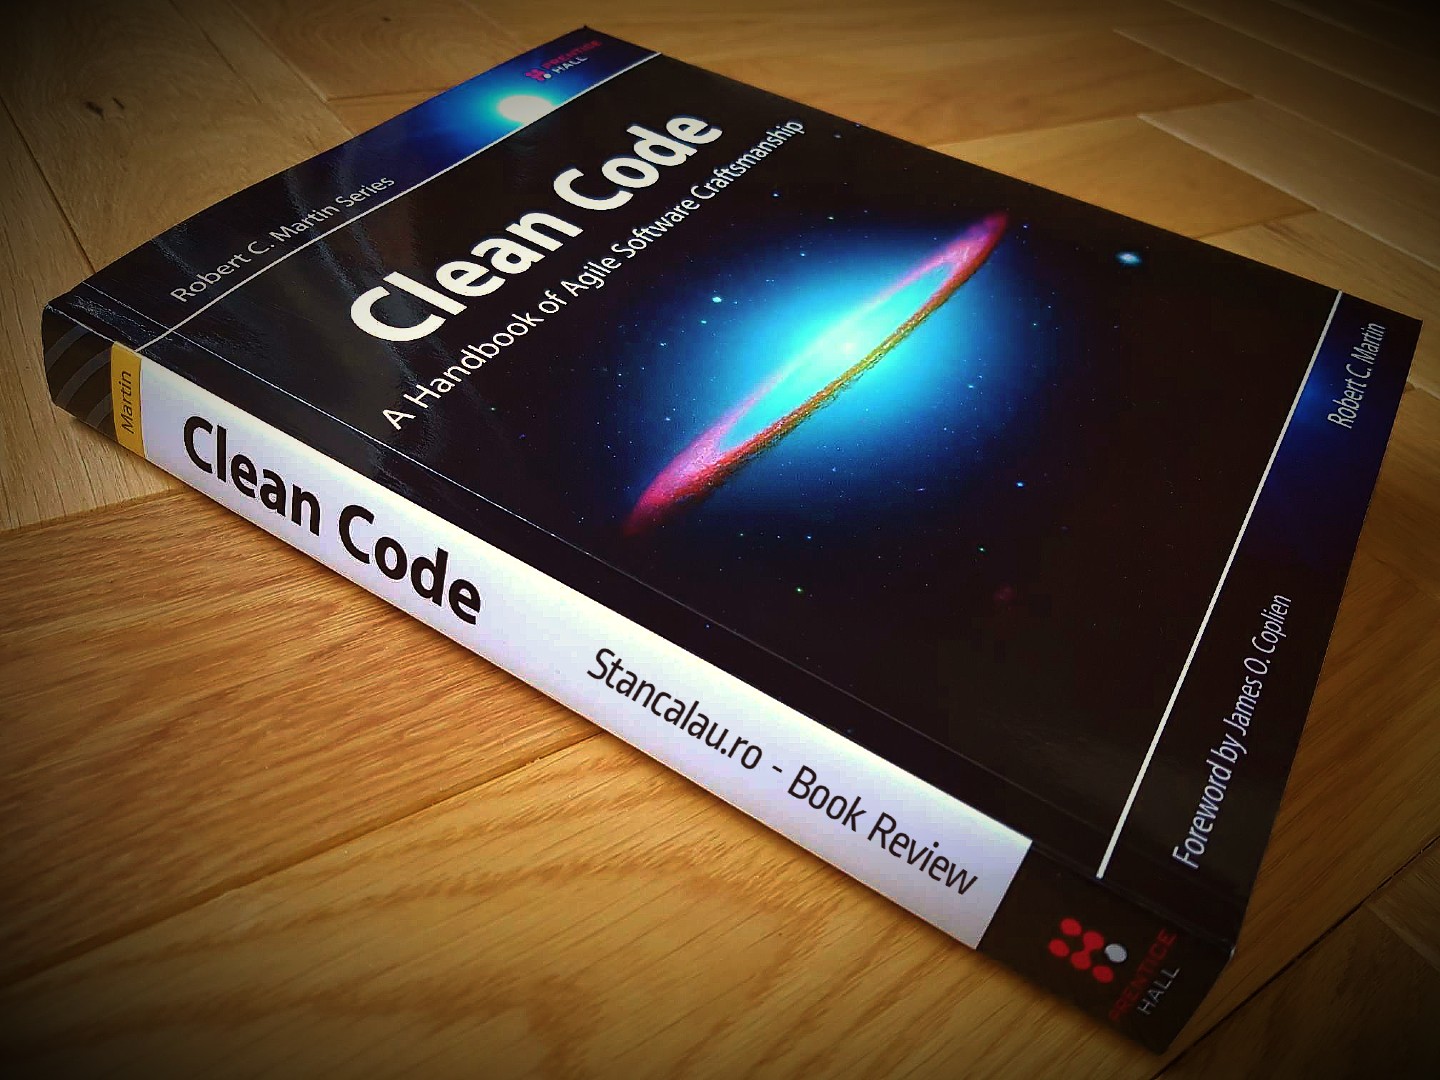 The Clean Code book - Guilherme Elizeire